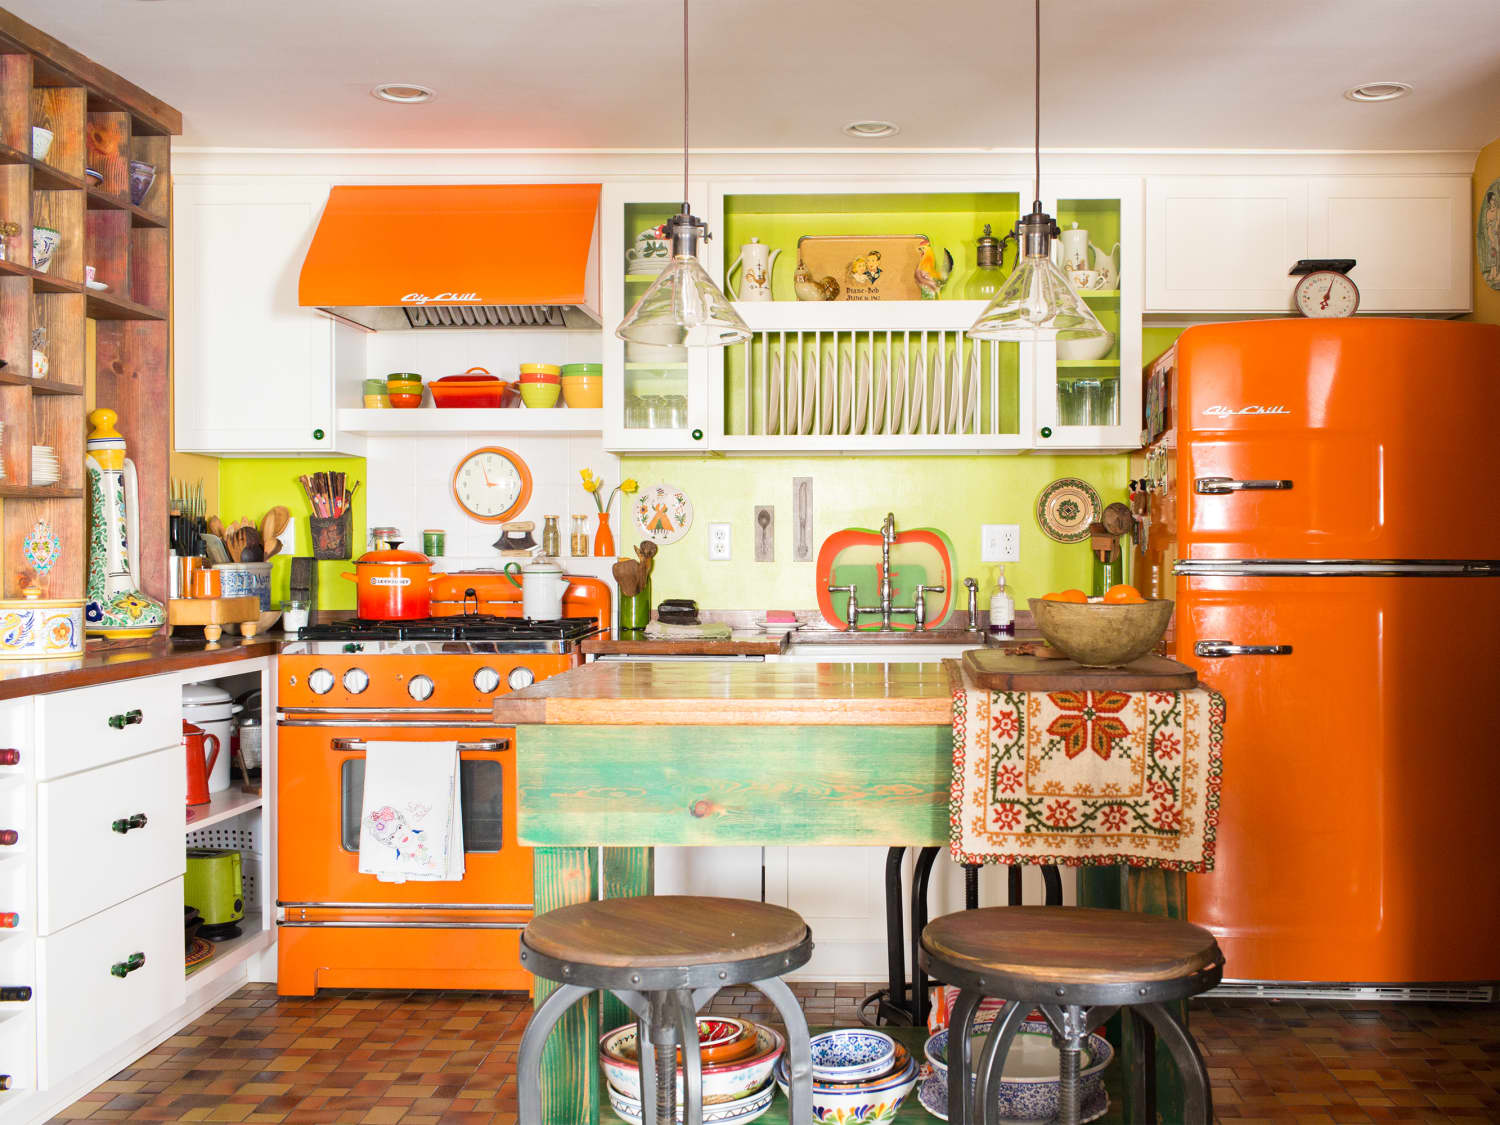 New appliance colors for our kitchens? Yes, please! 